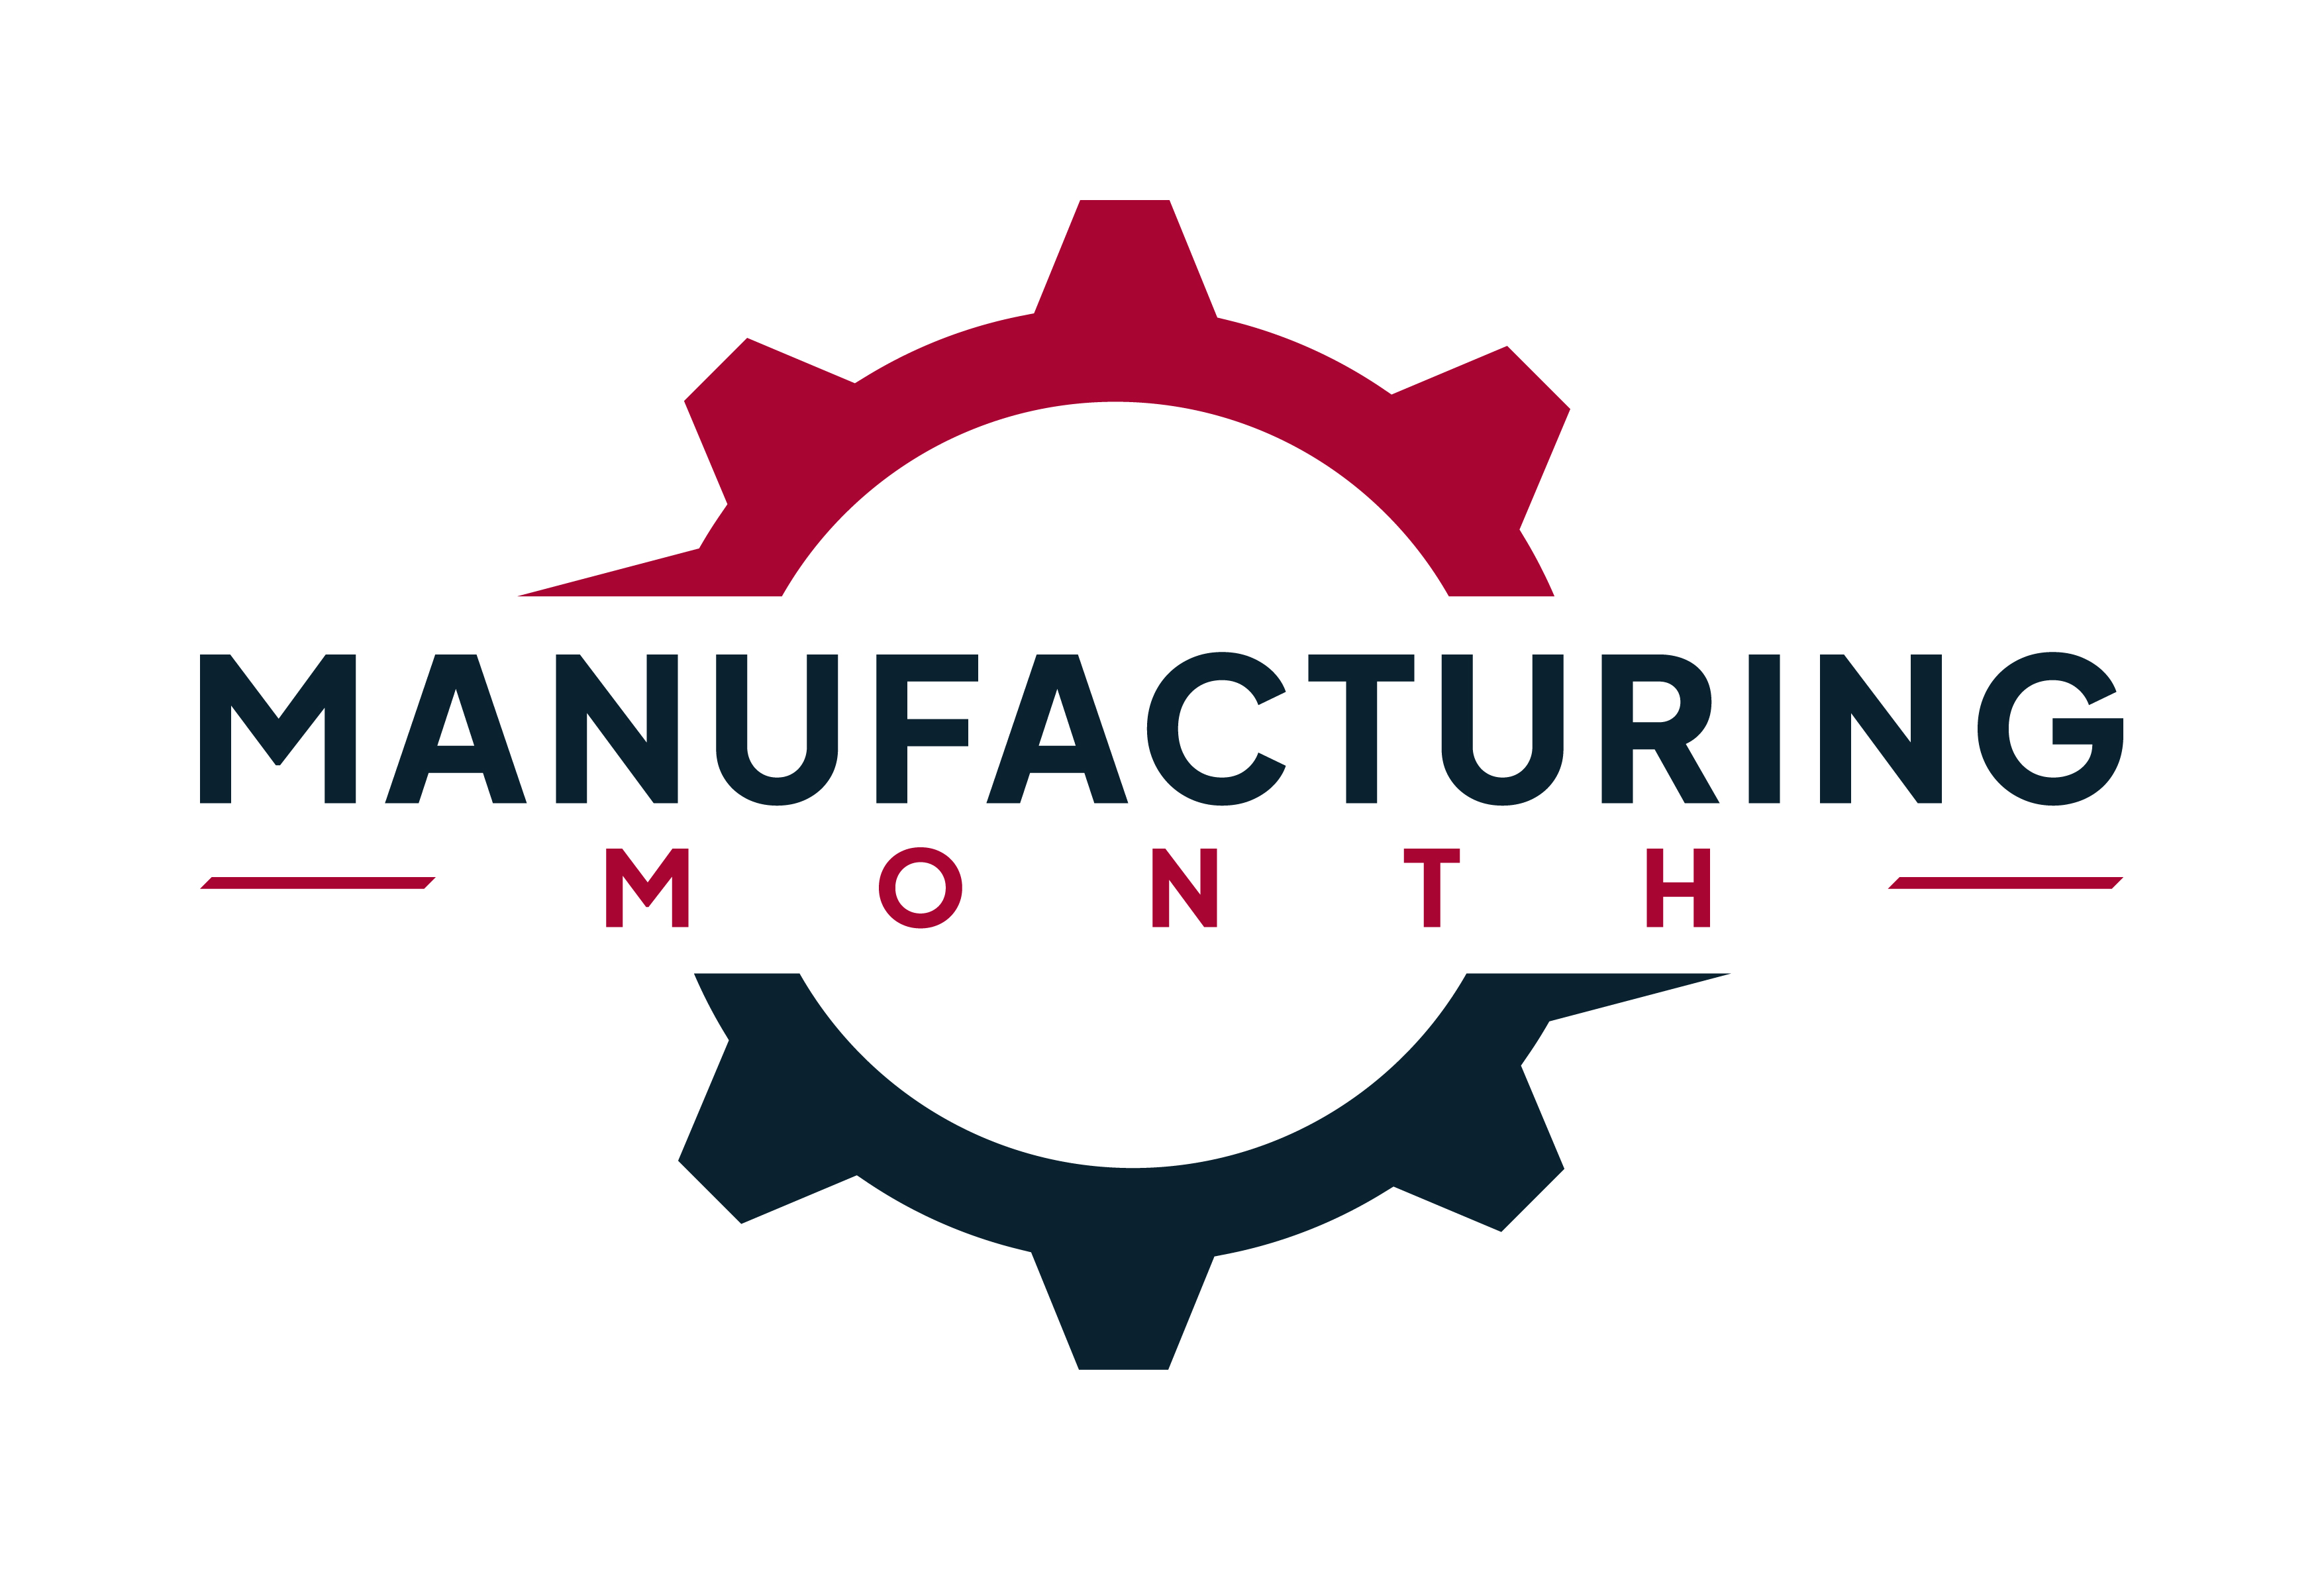 Manufacturing month plans for October in full motion